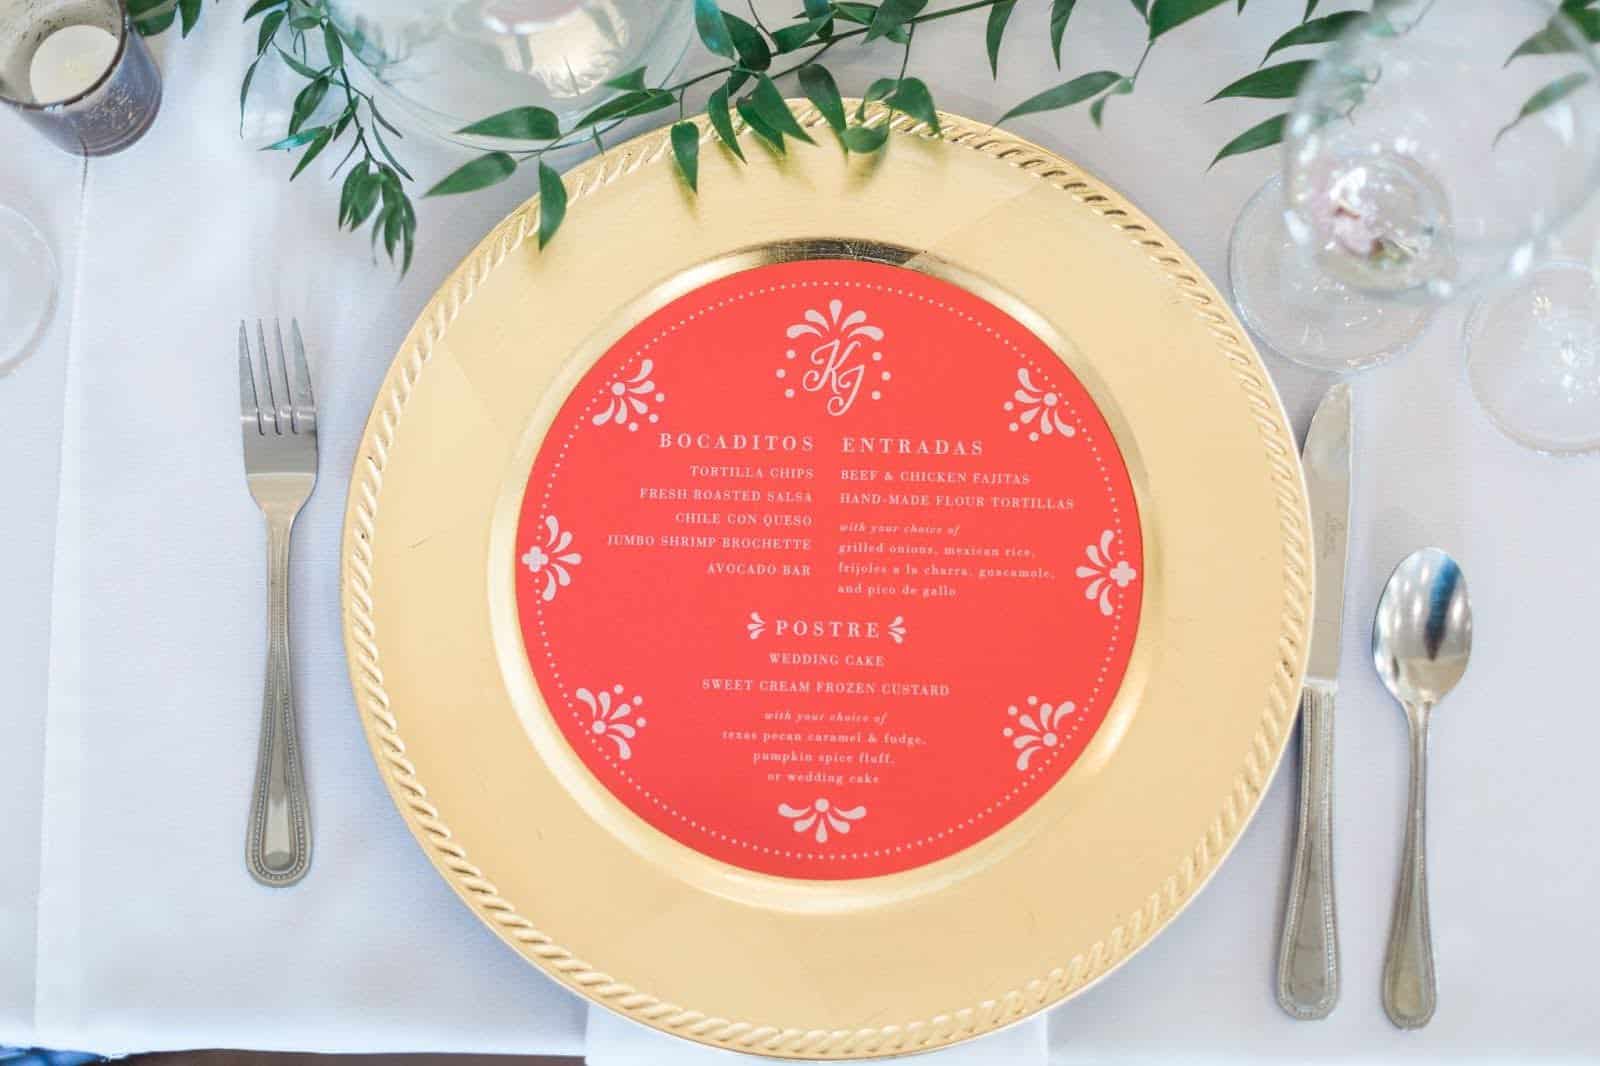 Plate setting for a Mexican wedding with a Spanish menu